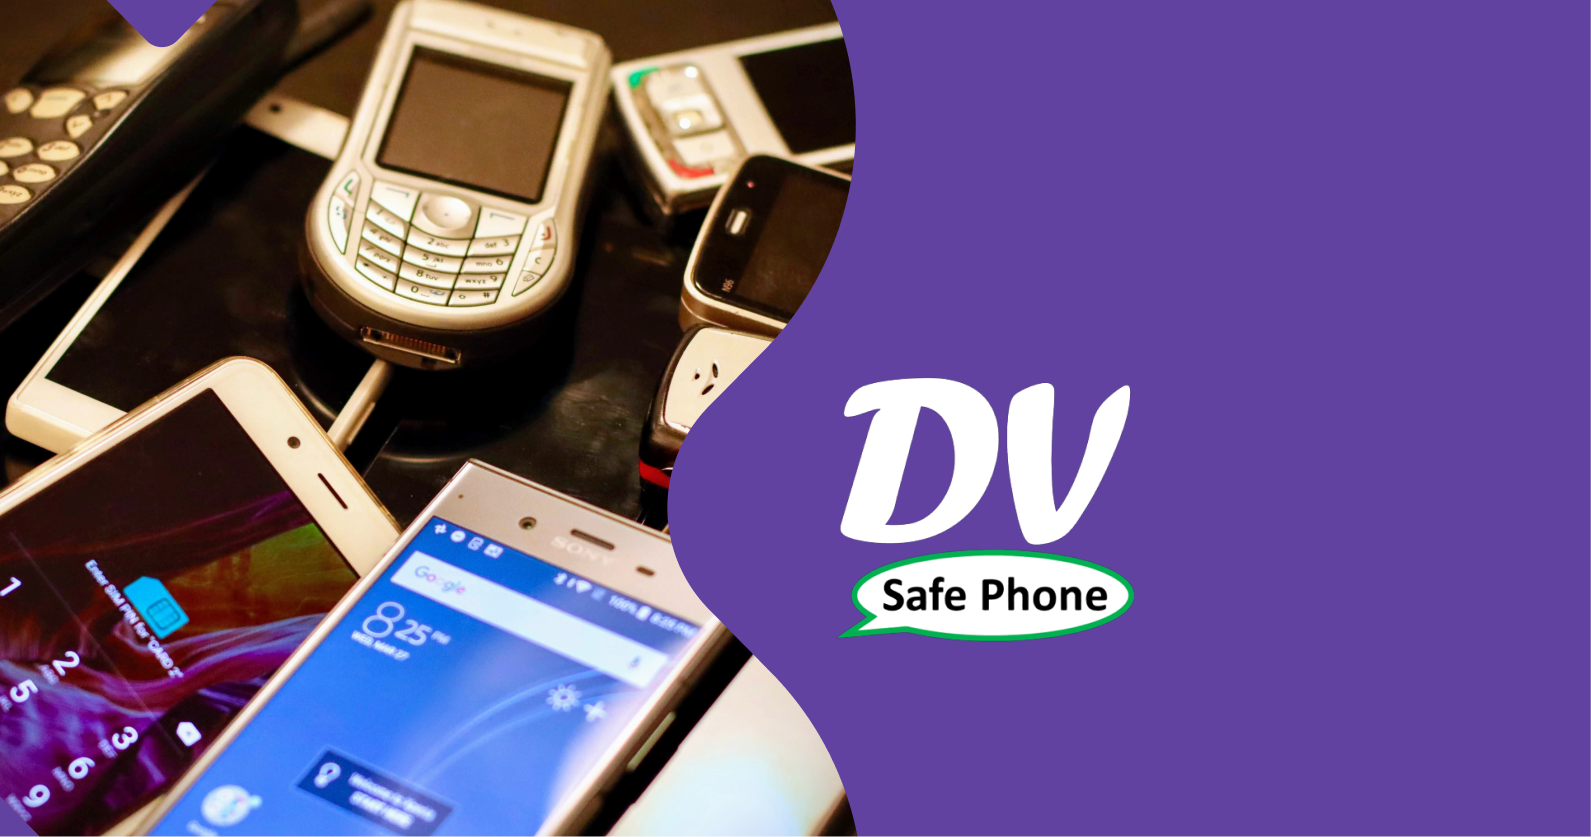 Picture of different types of mobile phones and the DV Safe Phone logo.